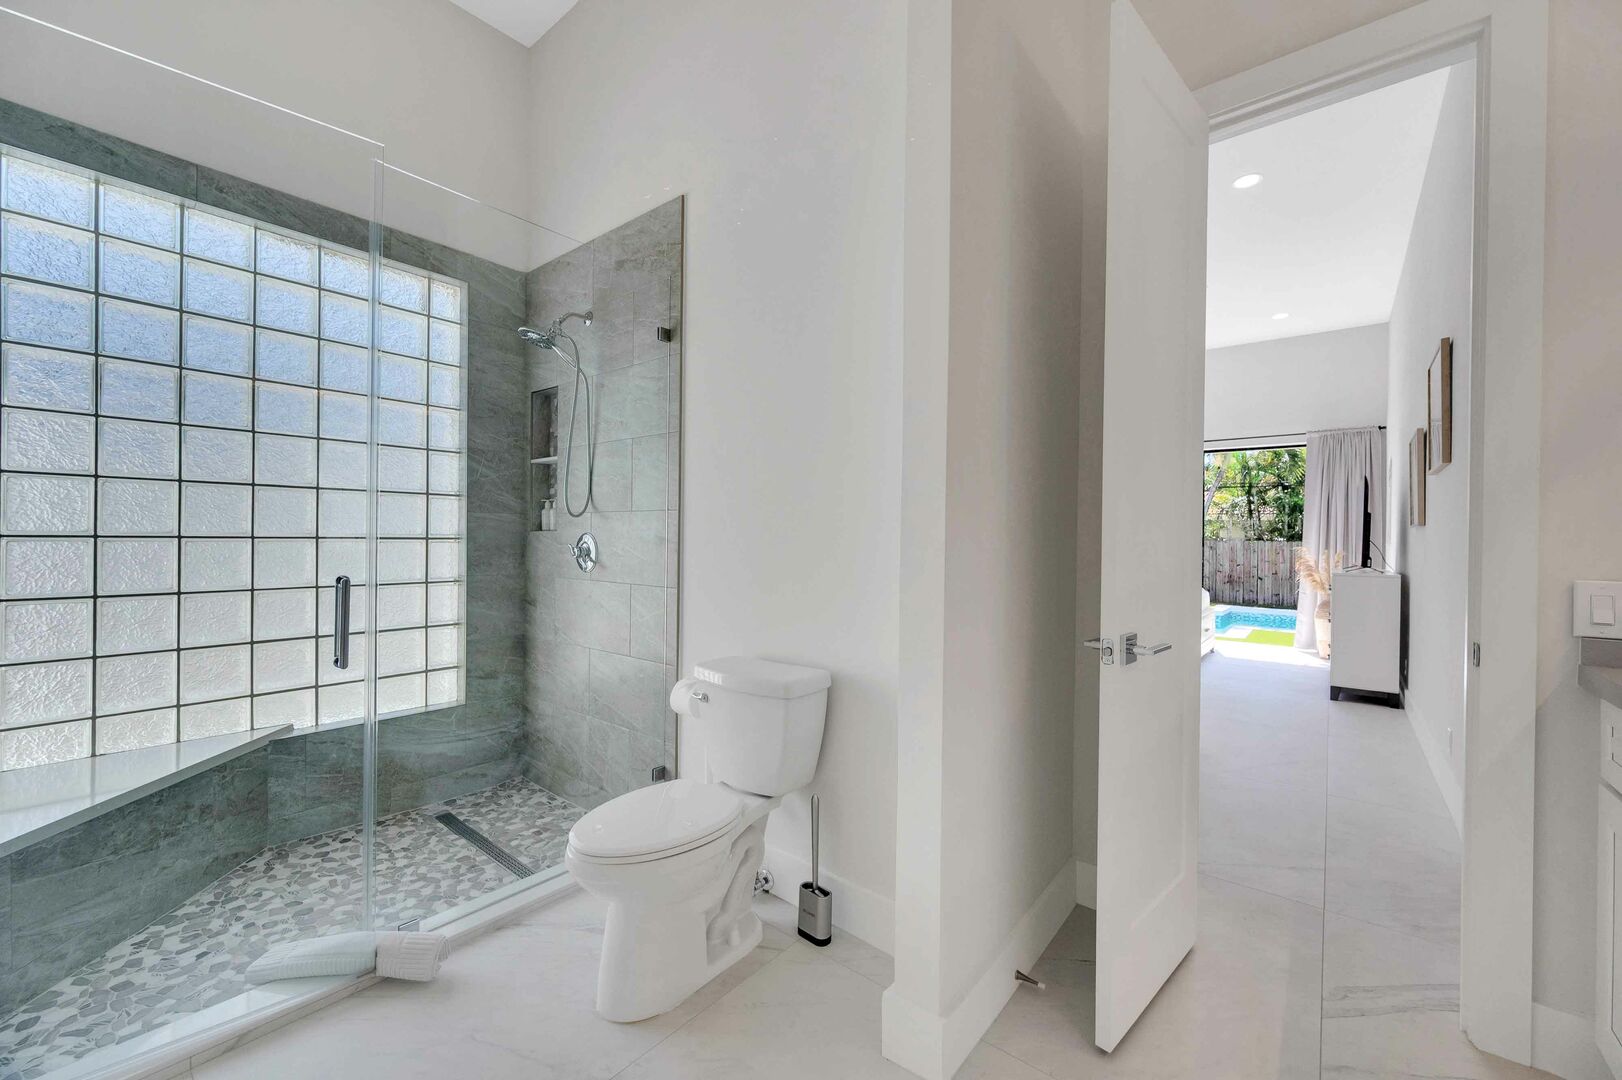 The en-suite primary bathroom features two sinks an a walk-in shower.